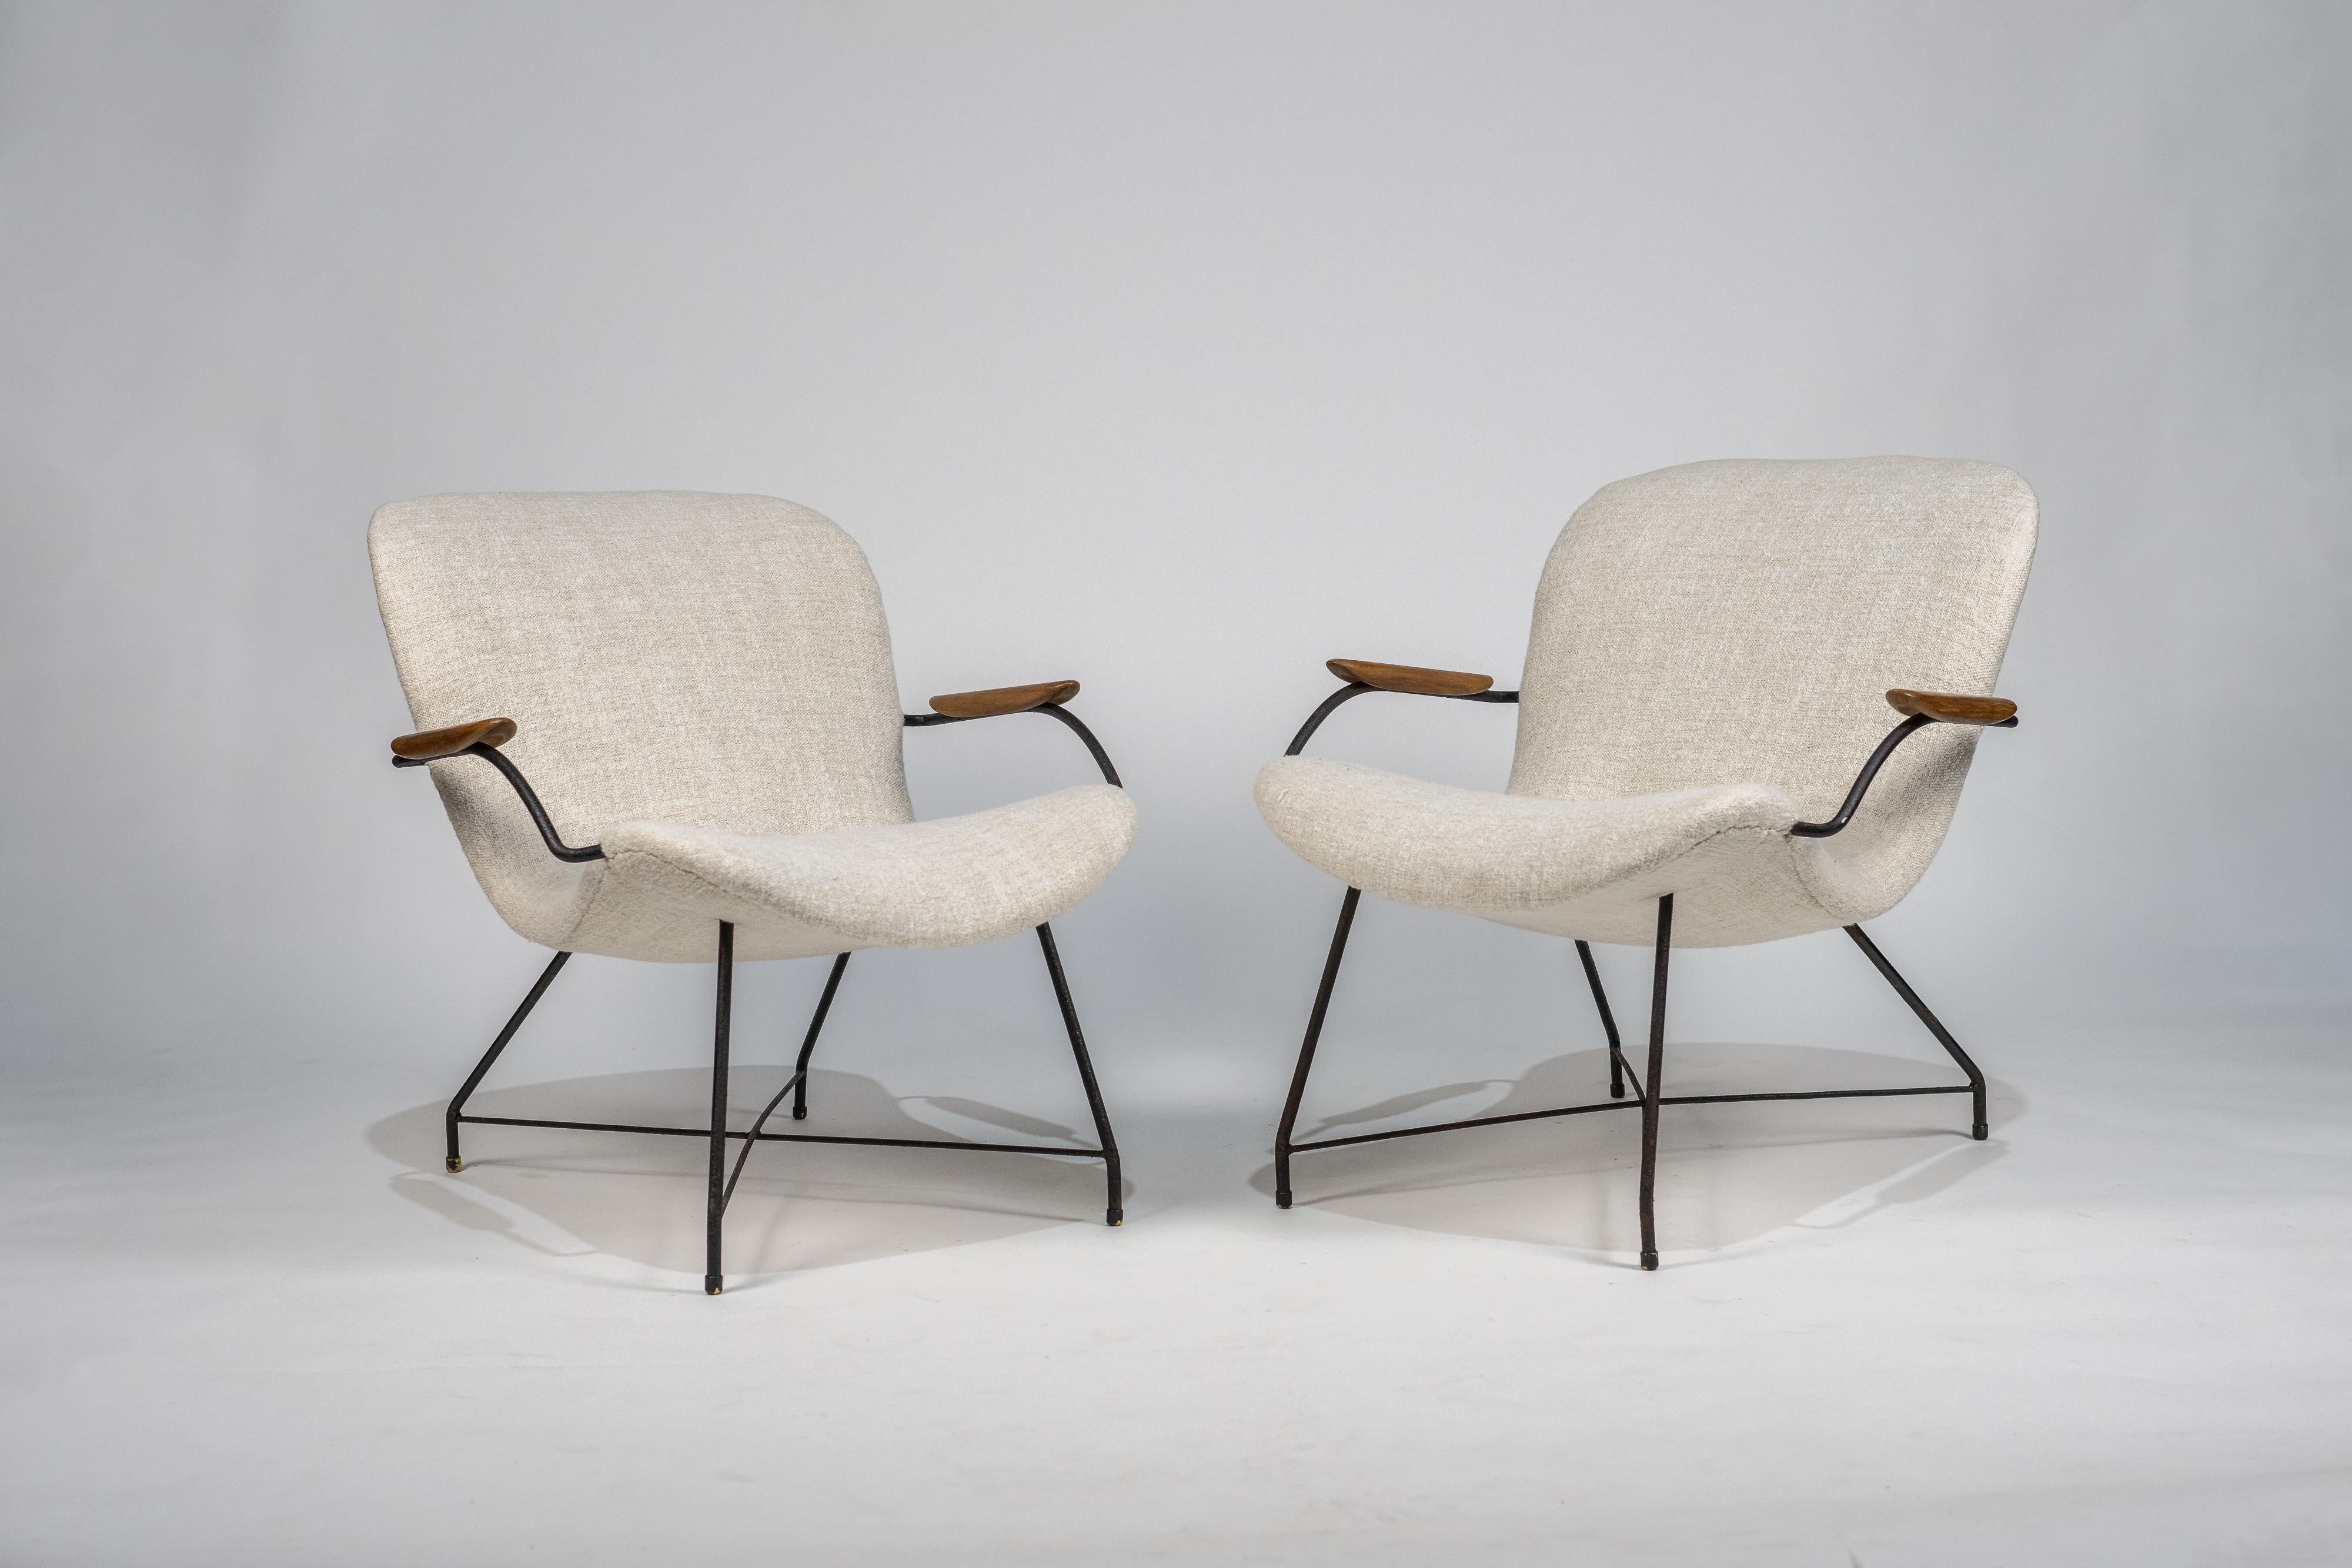 This pair of armchairs, created by the designer duo Carlo Hauner and Martin Eisler, reflects the characteristic style of Brazilian design of the 1950s and 1960s. The dimensions of each armchair are 73 x 68 x 41 cm, with a seat height of 41 cm,